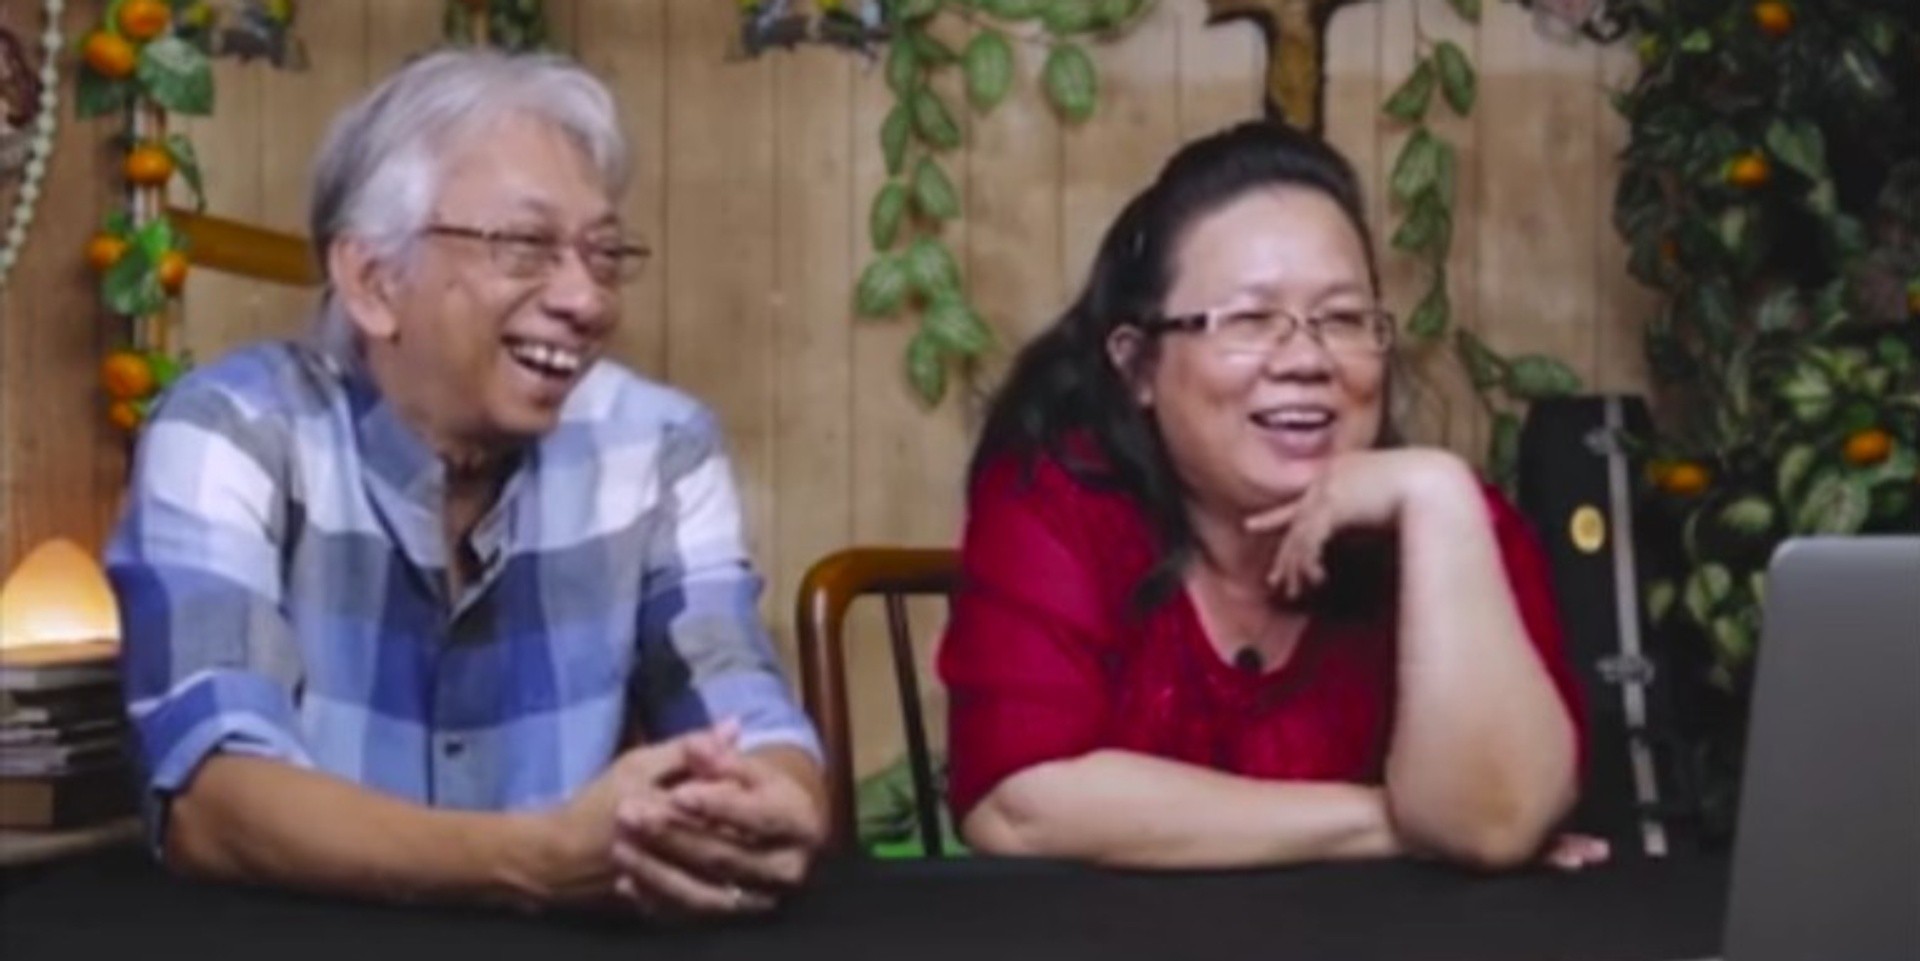 Parents react to Villes & THELIONCITYBOY's music video for 'The Fear Generation' — watch